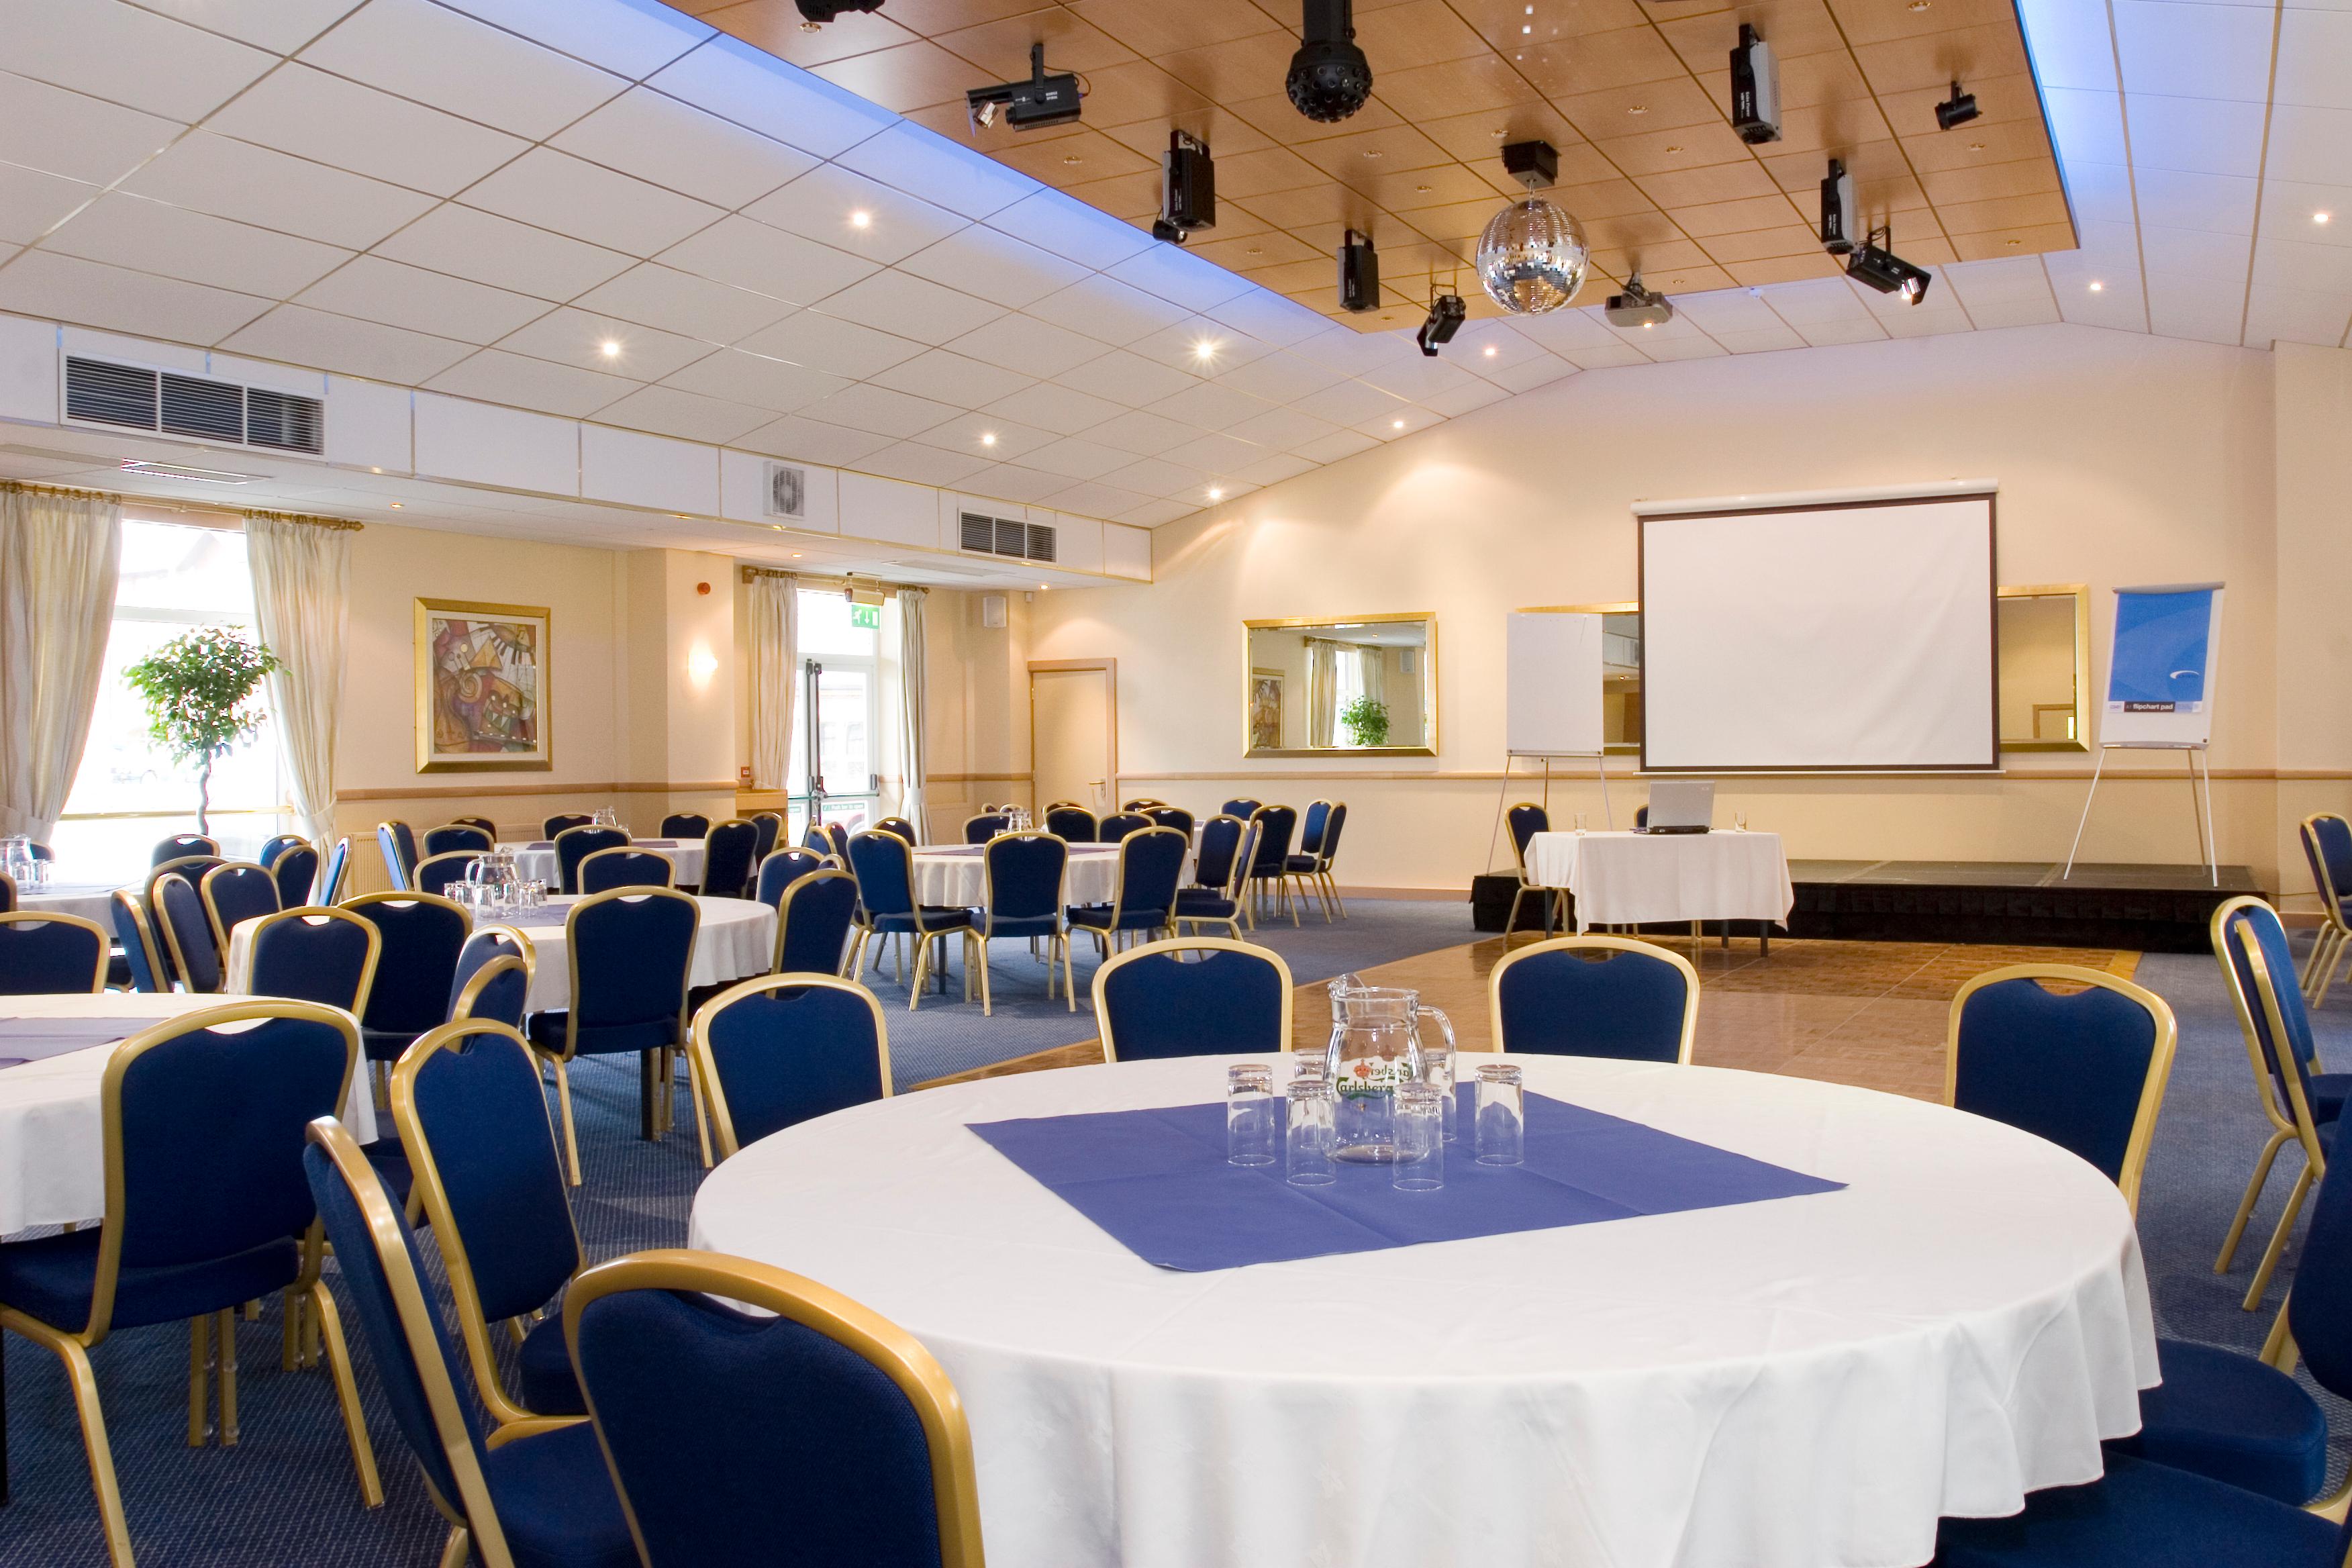 The Fairway And Bluebell Banqueting Suite, Bluebell Banqueting Suite photo #3